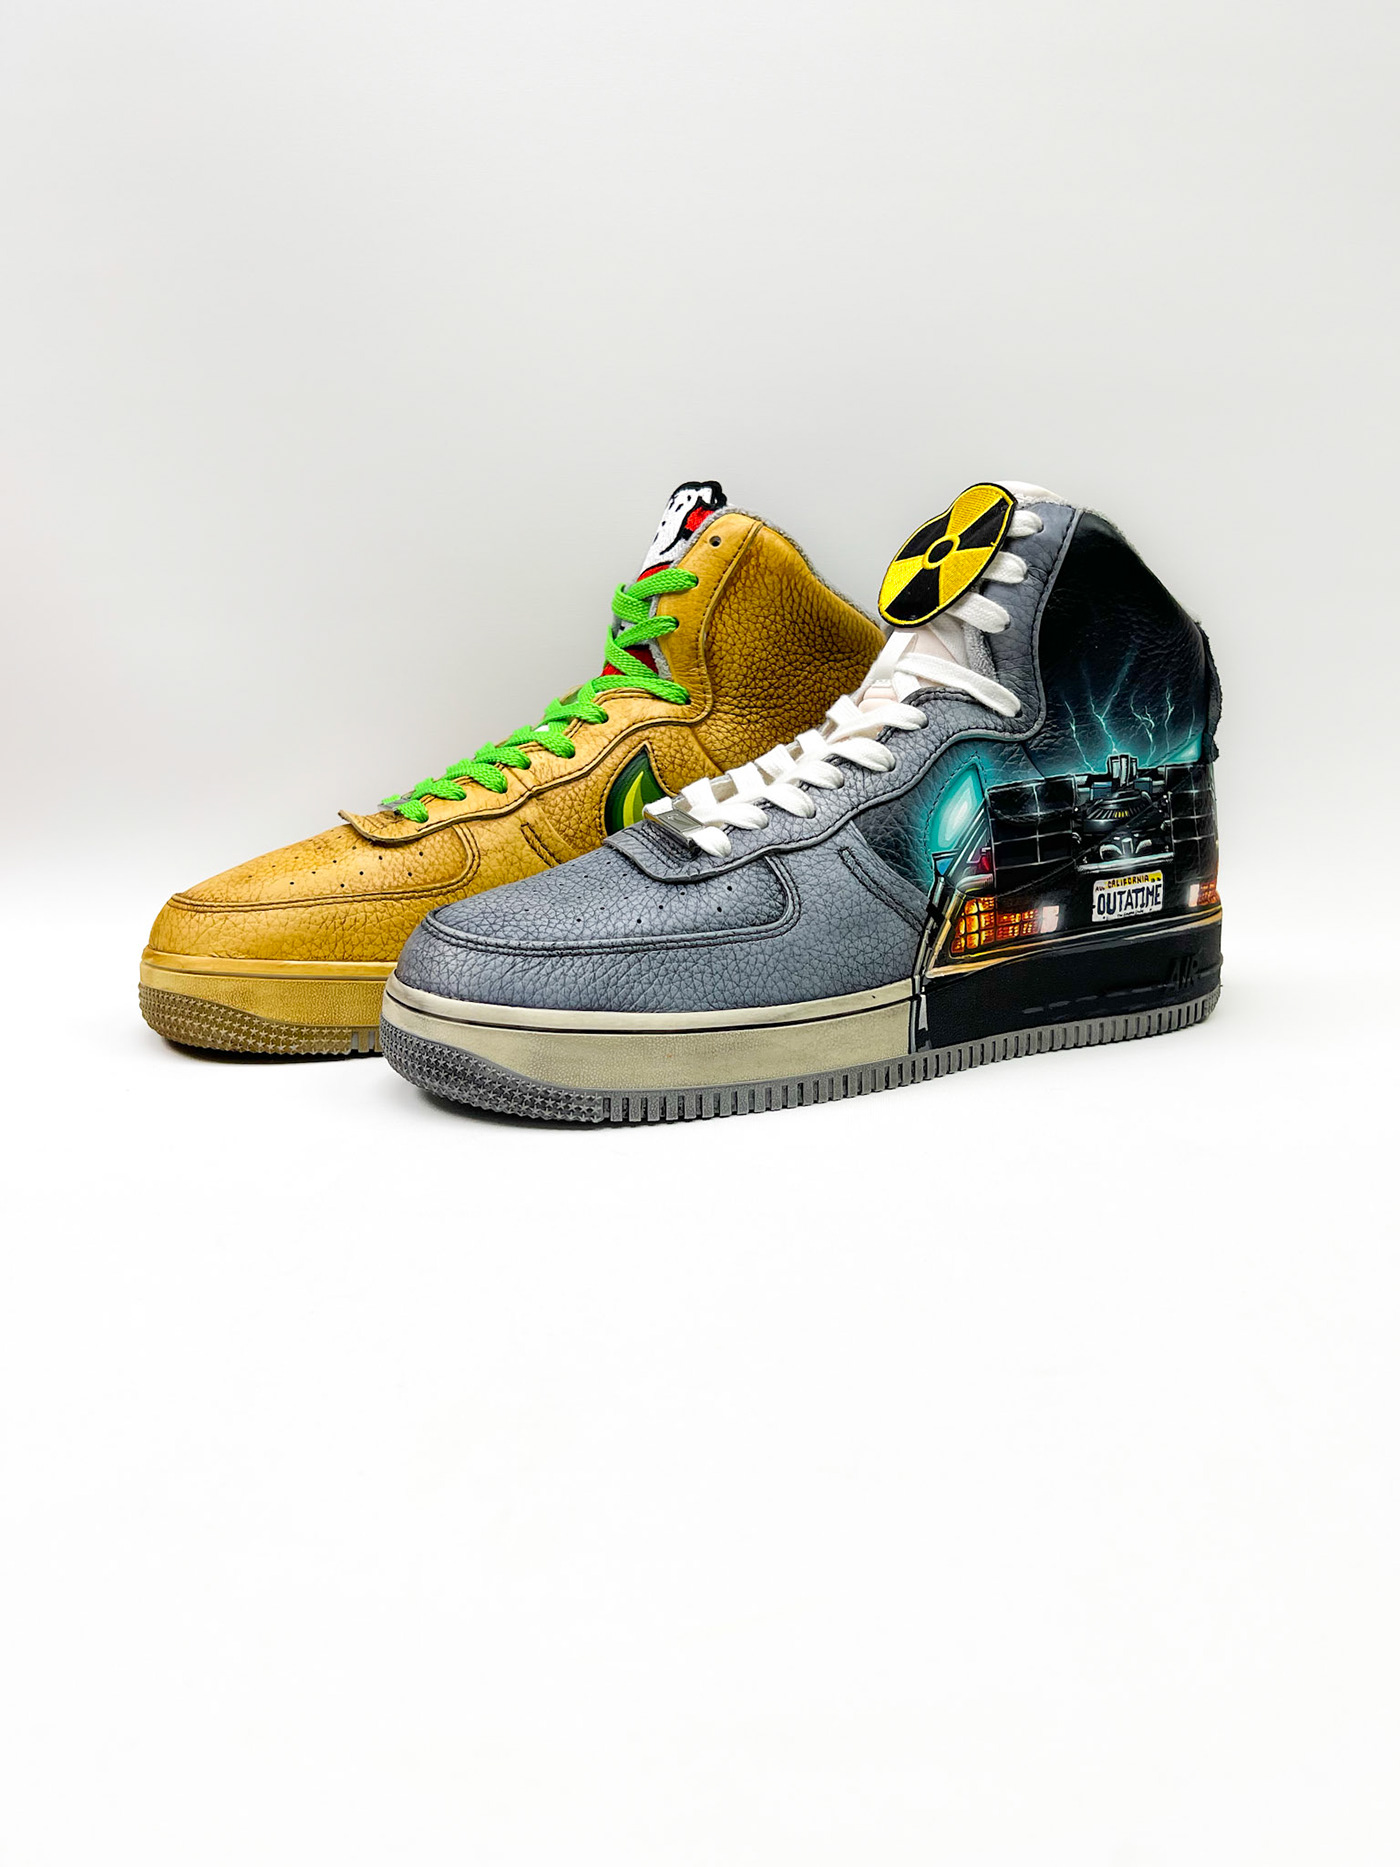 Custom customshoes handpainted Ghostbusters Nike airforce1 DeLorean backtothefuture bttf Ecto1